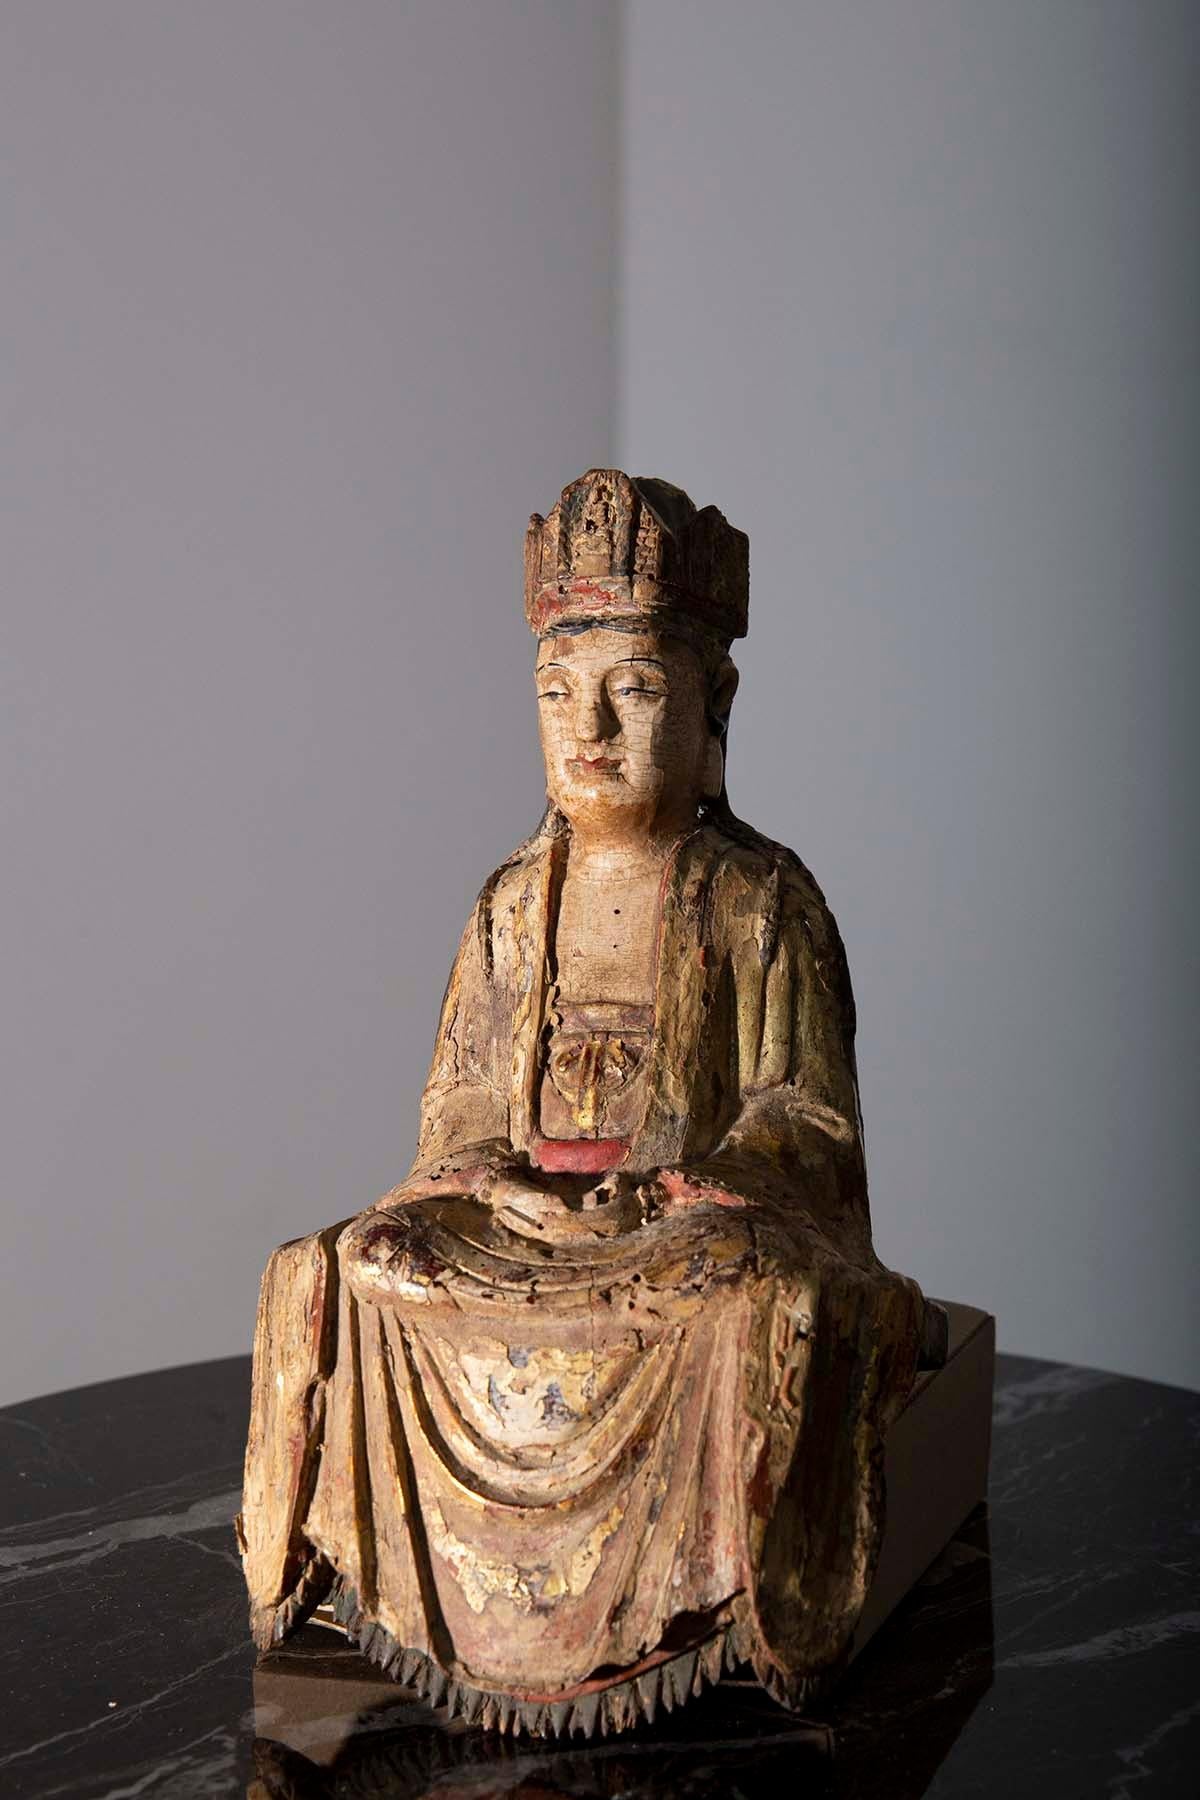 In a realm where time stands still, there exists a 16th-century masterpiece, a sculpture of unparalleled beauty that transports you to the heart of the Ming dynasty. Here, in a place of reverence and artistry, sits the Chinese Bodhisattva Guanyin,